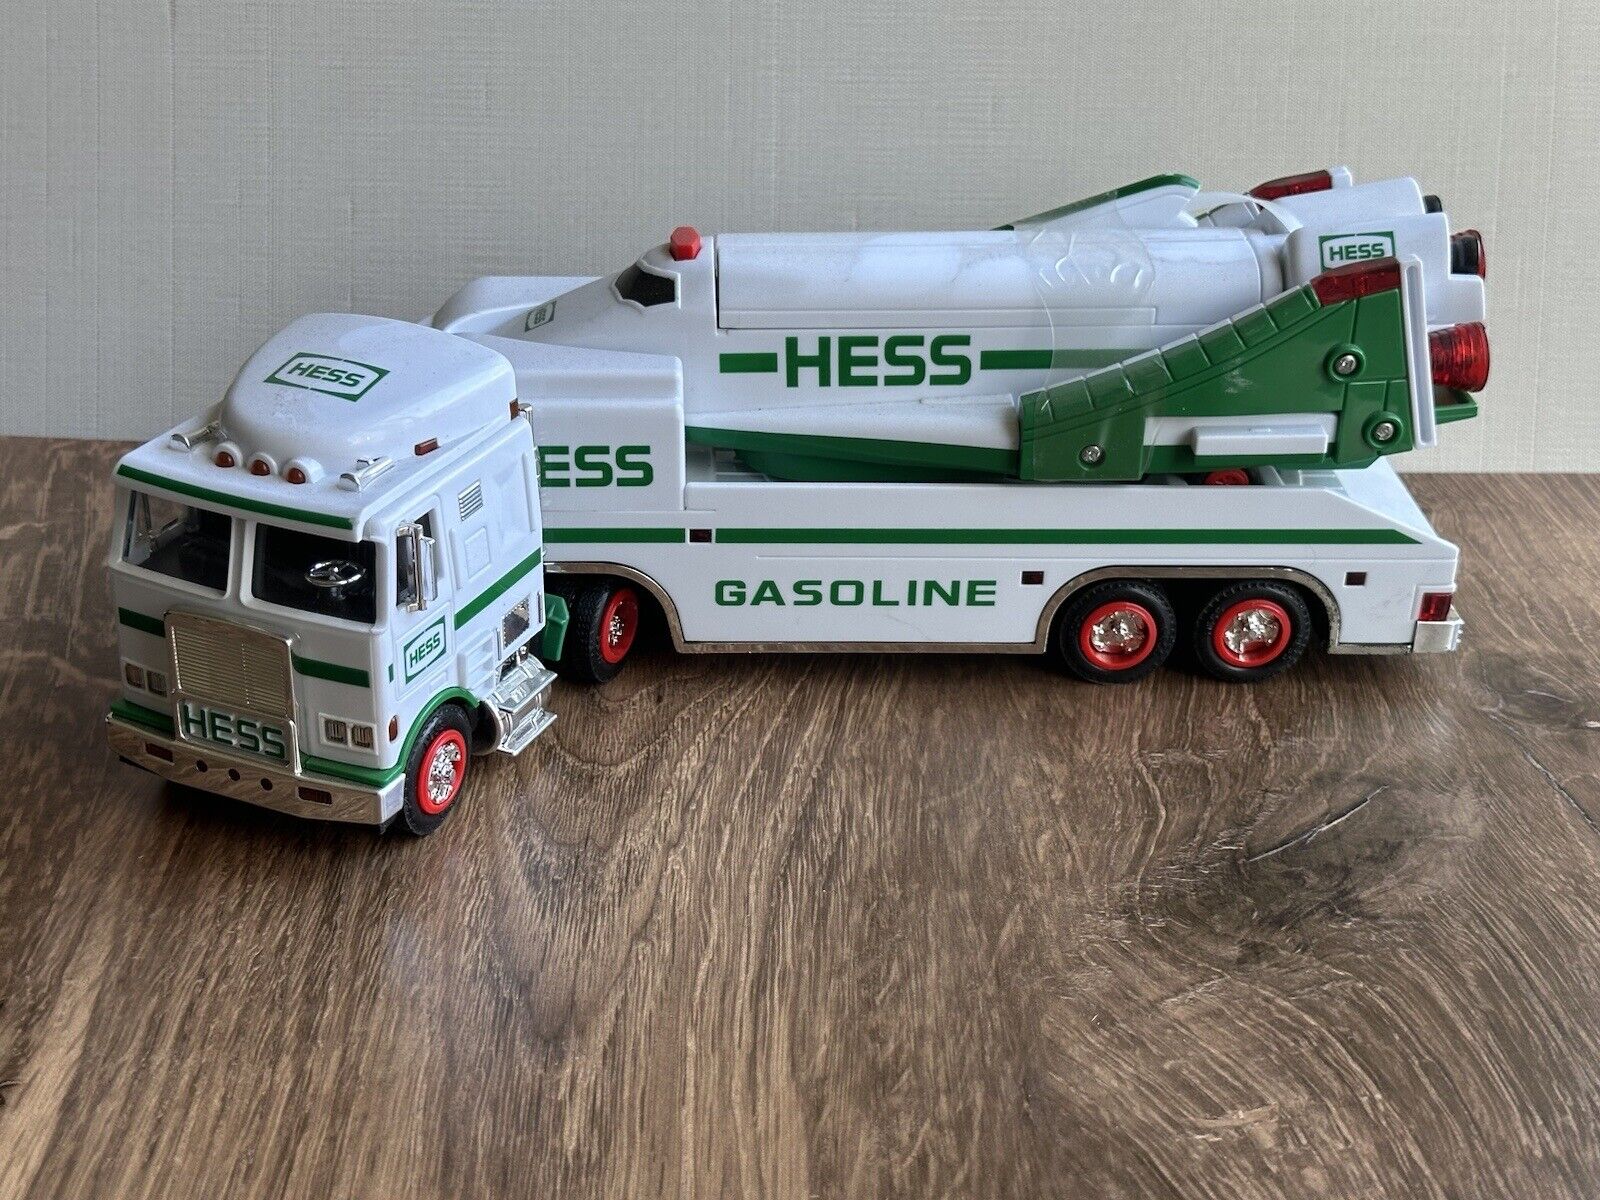 Hess 1999 Toy Truck and Space Shuttle Vintage